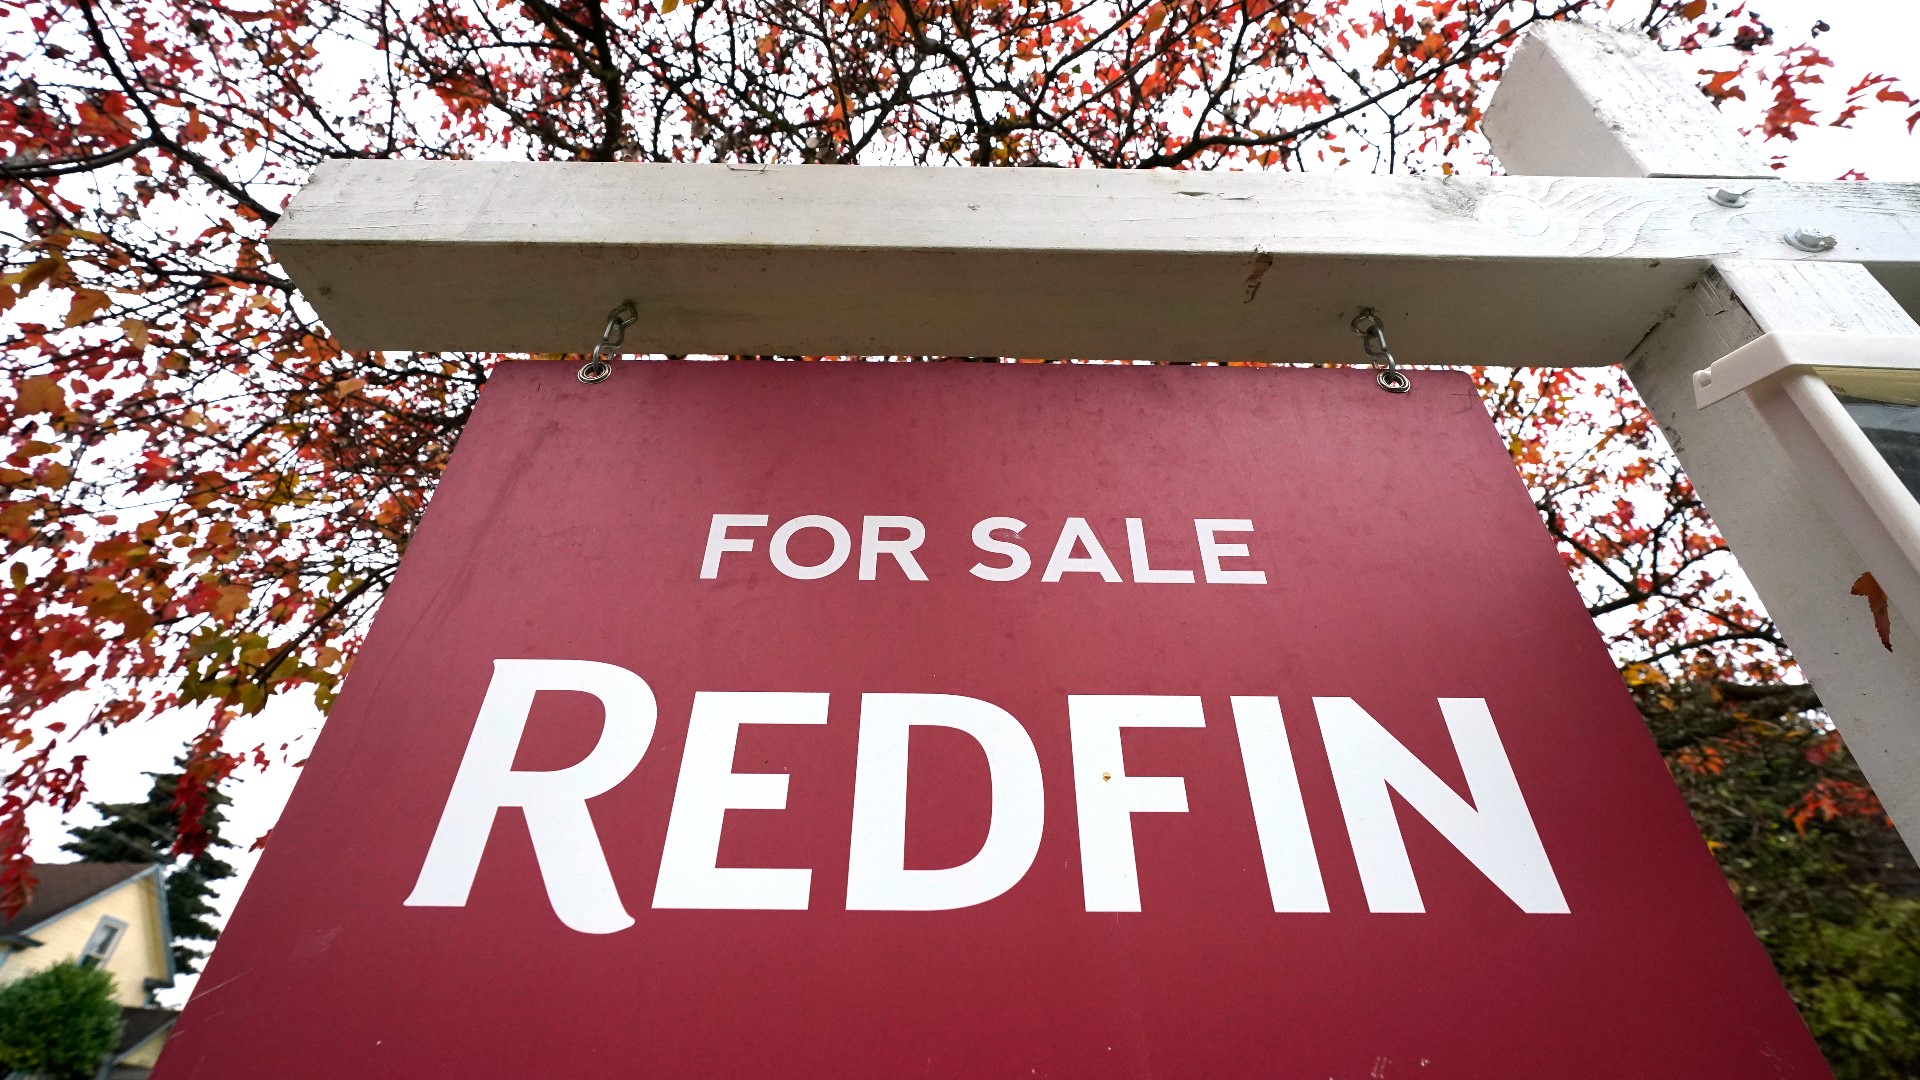 The job cuts amount to 13% of Redfin's workforce, the company announced in a regulatory filing